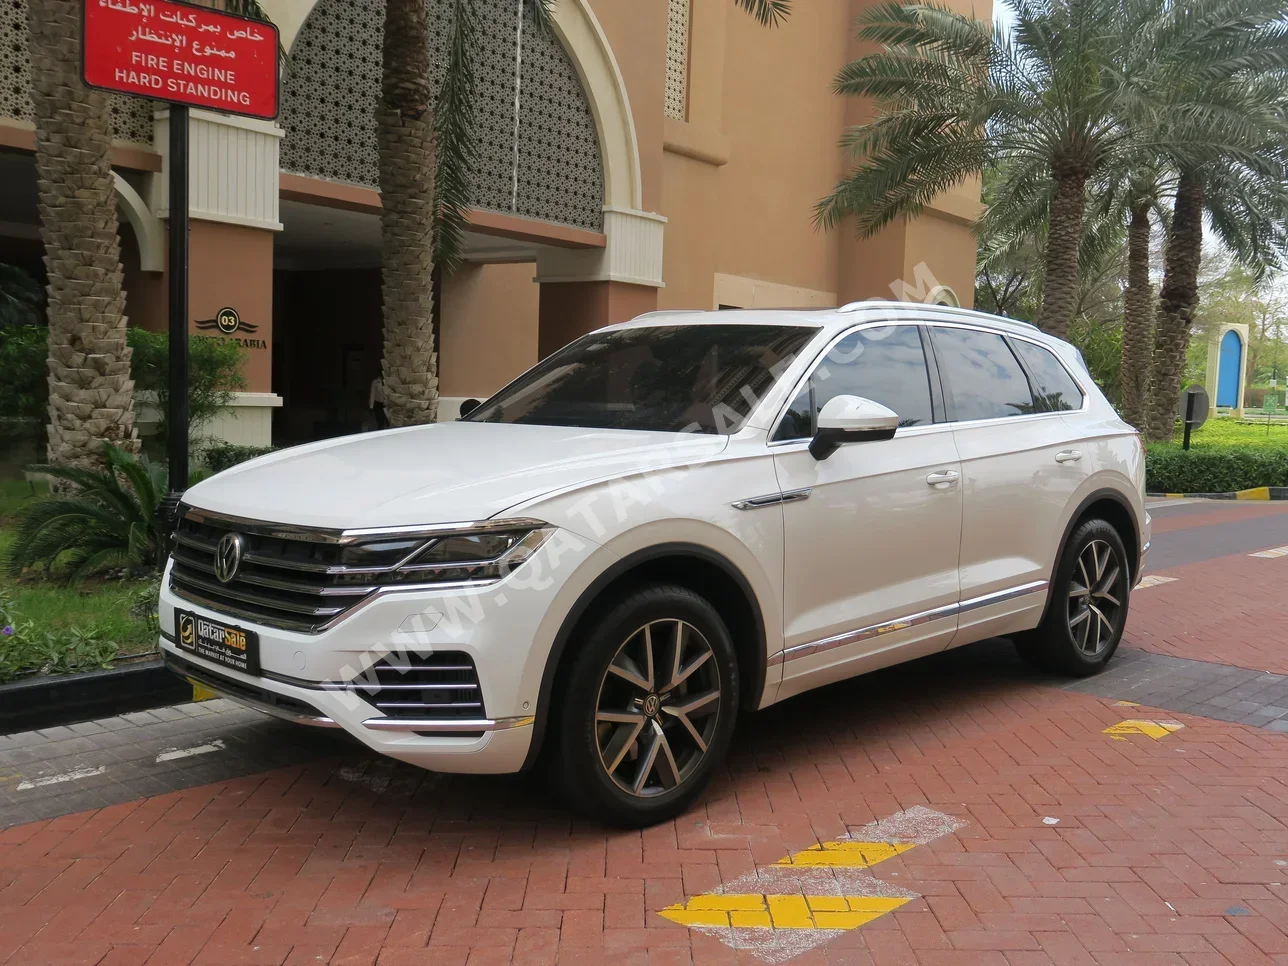 Volkswagen  Touareg  Highline plus  2020  Automatic  55,820 Km  6 Cylinder  All Wheel Drive (AWD)  SUV  White  With Warranty